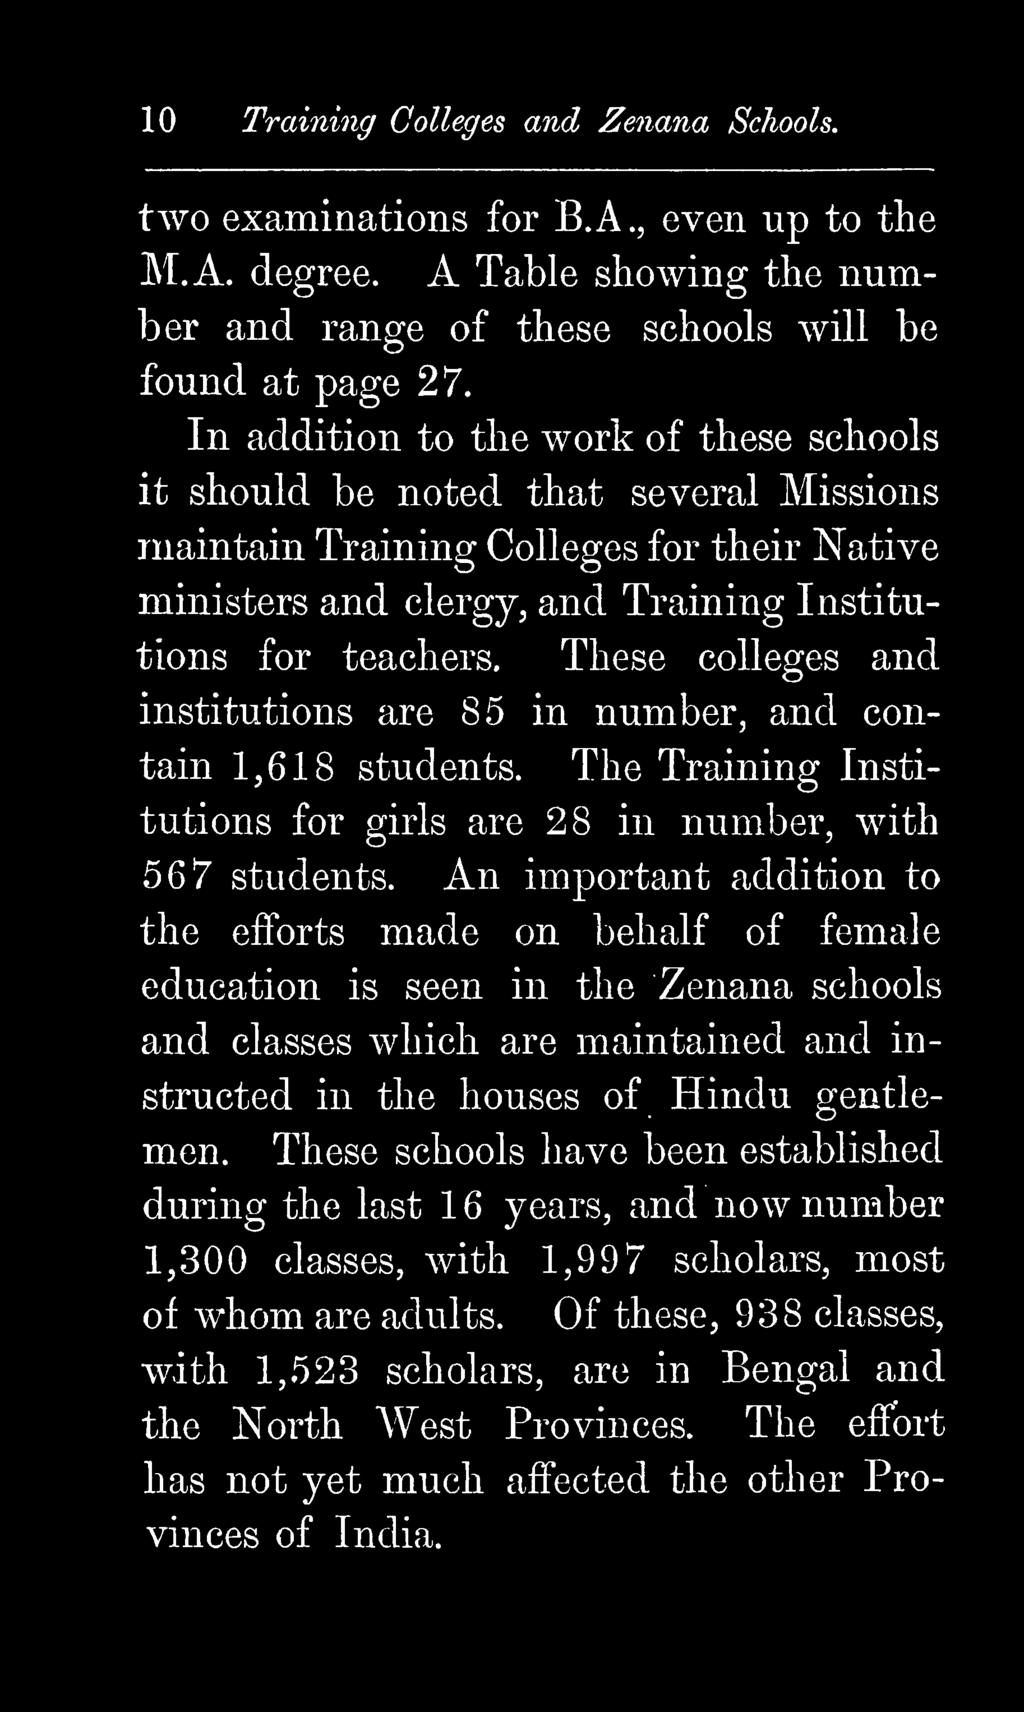 These colleges and institutions are 85 in number, and contain 1,618 students. The Training Institutions for girls are 28 in number, with ^Q7 students.